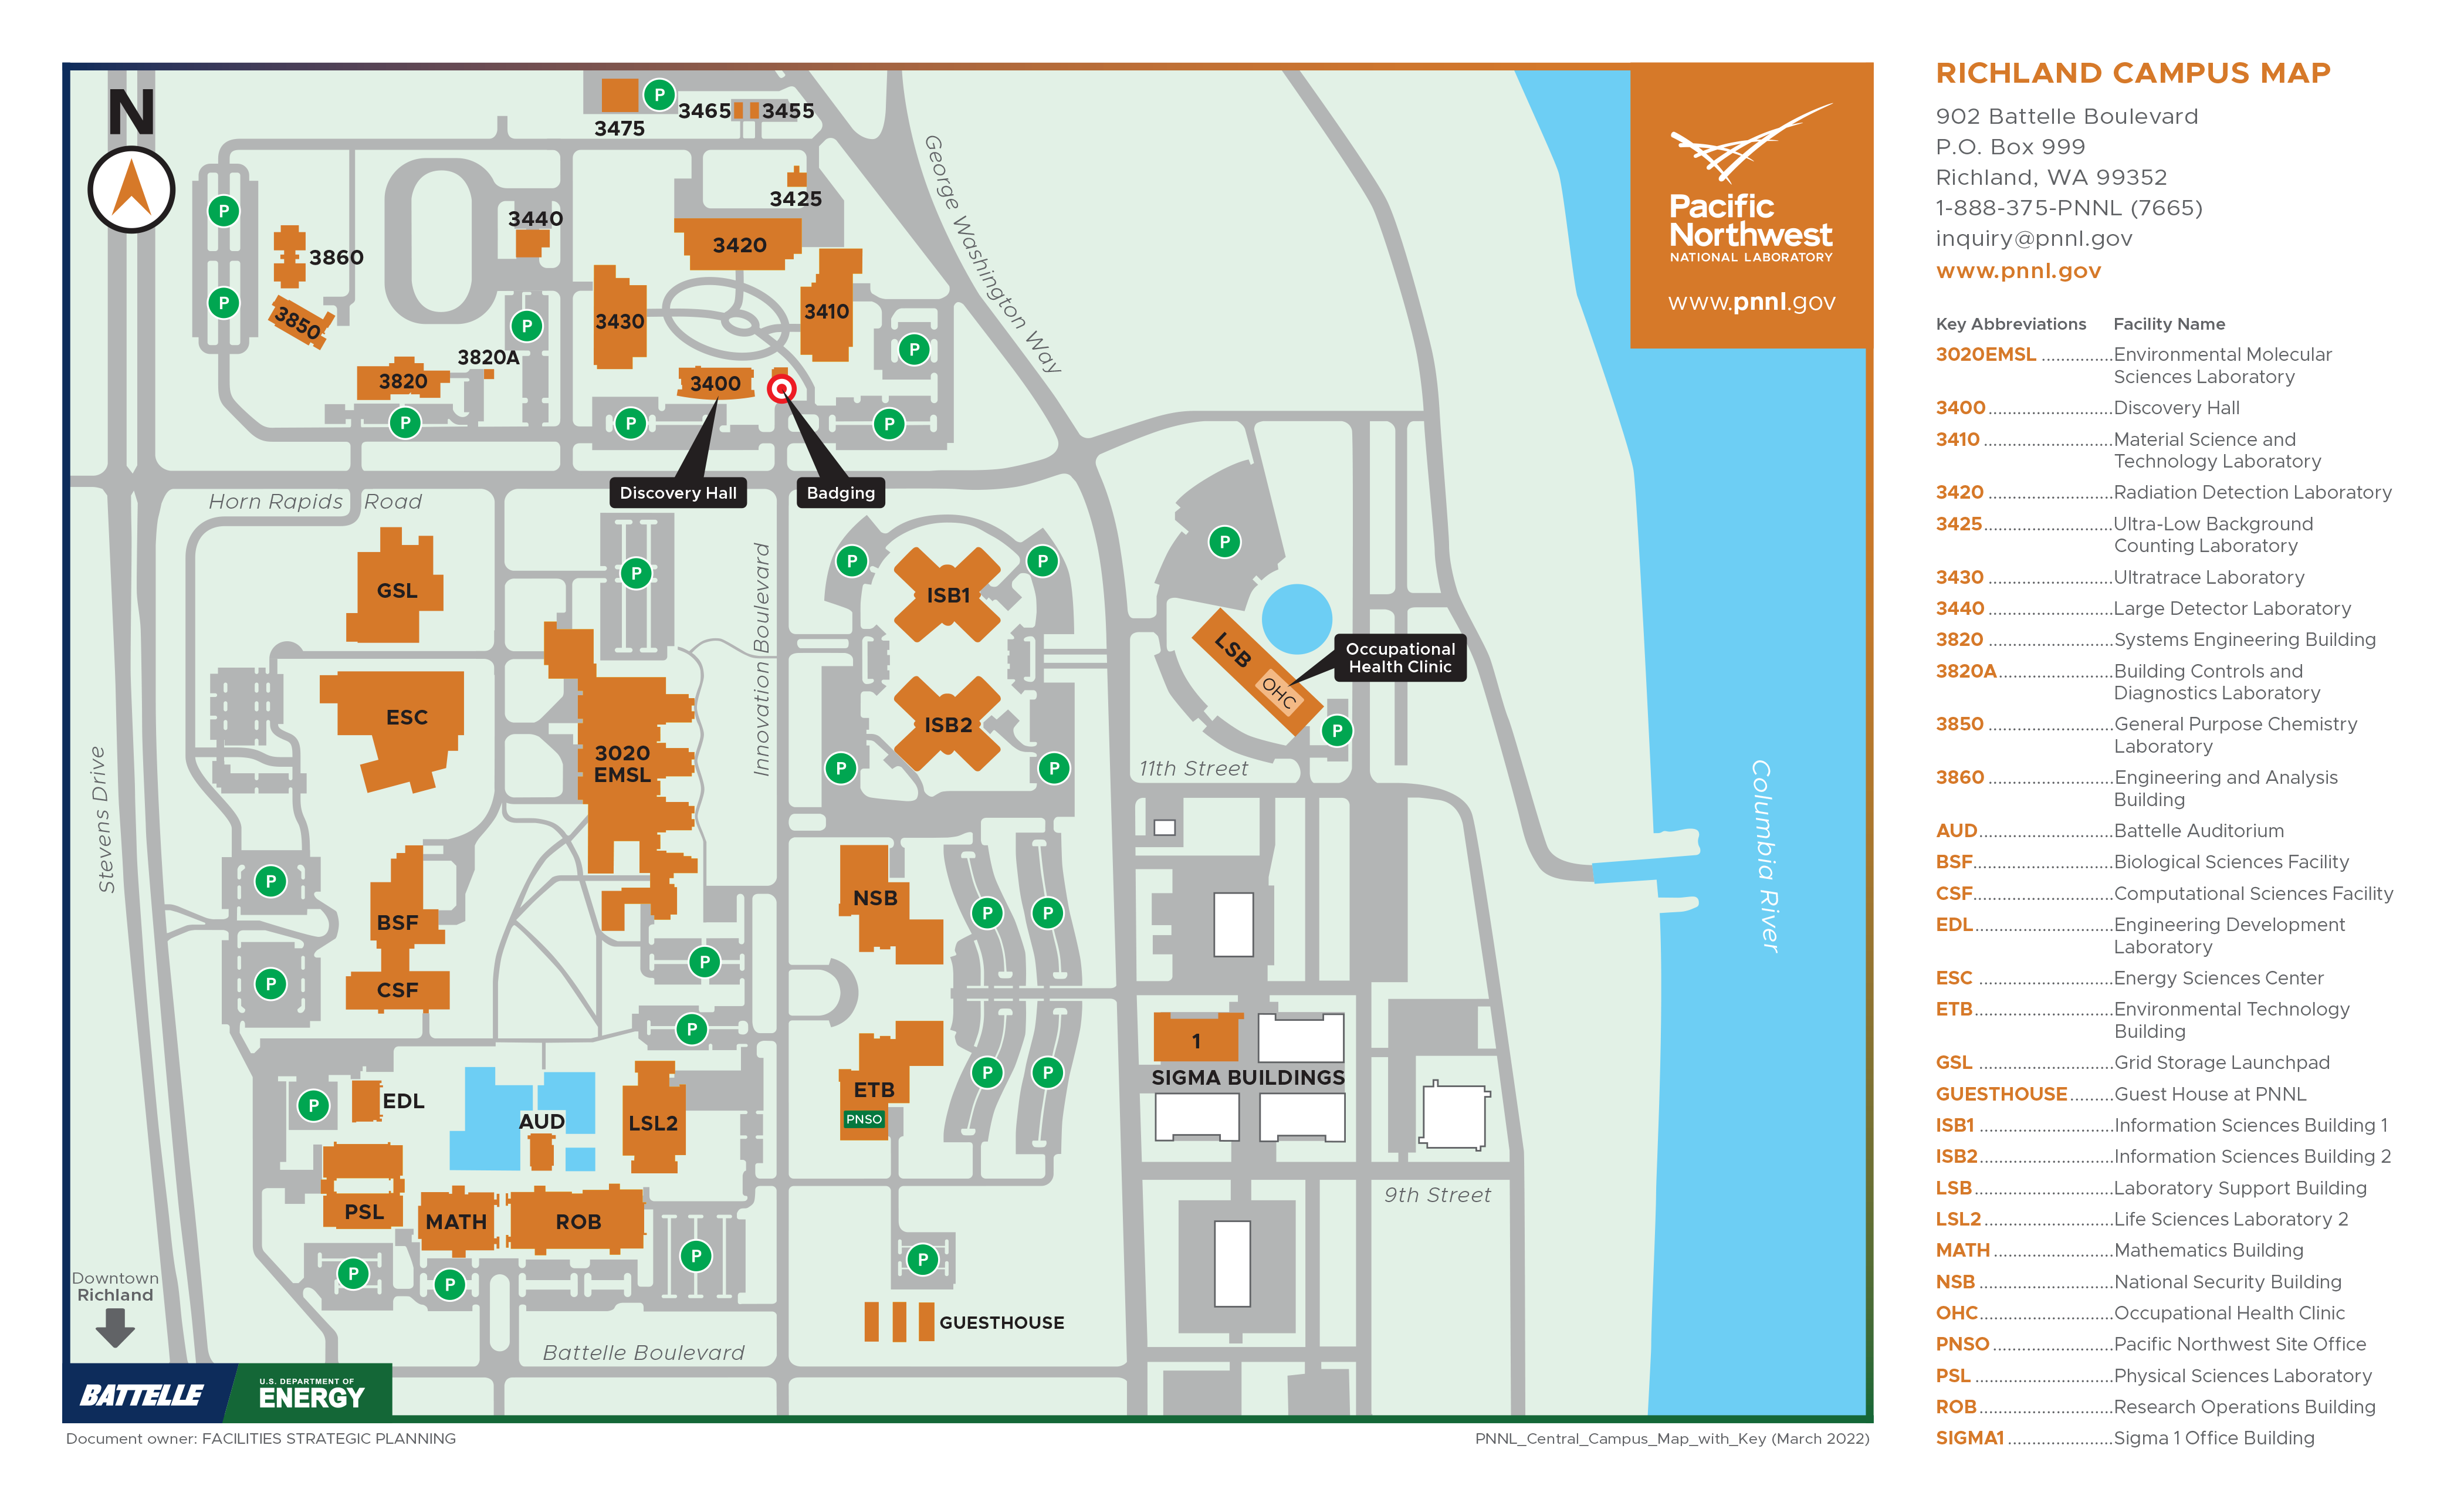 PNNL Central Campus Map with Key (2019)